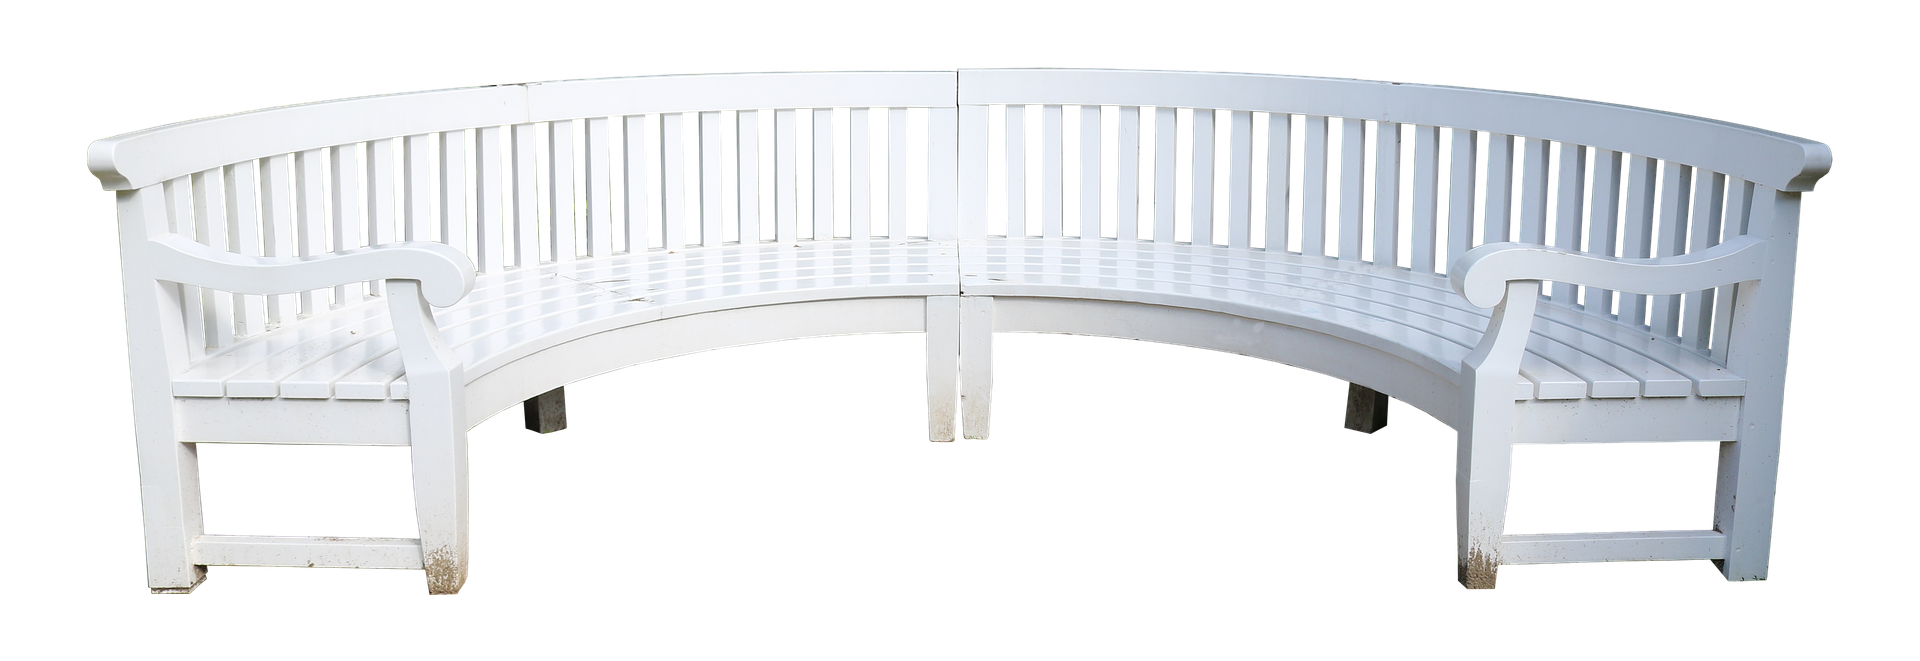 A White Bench With A Black Background